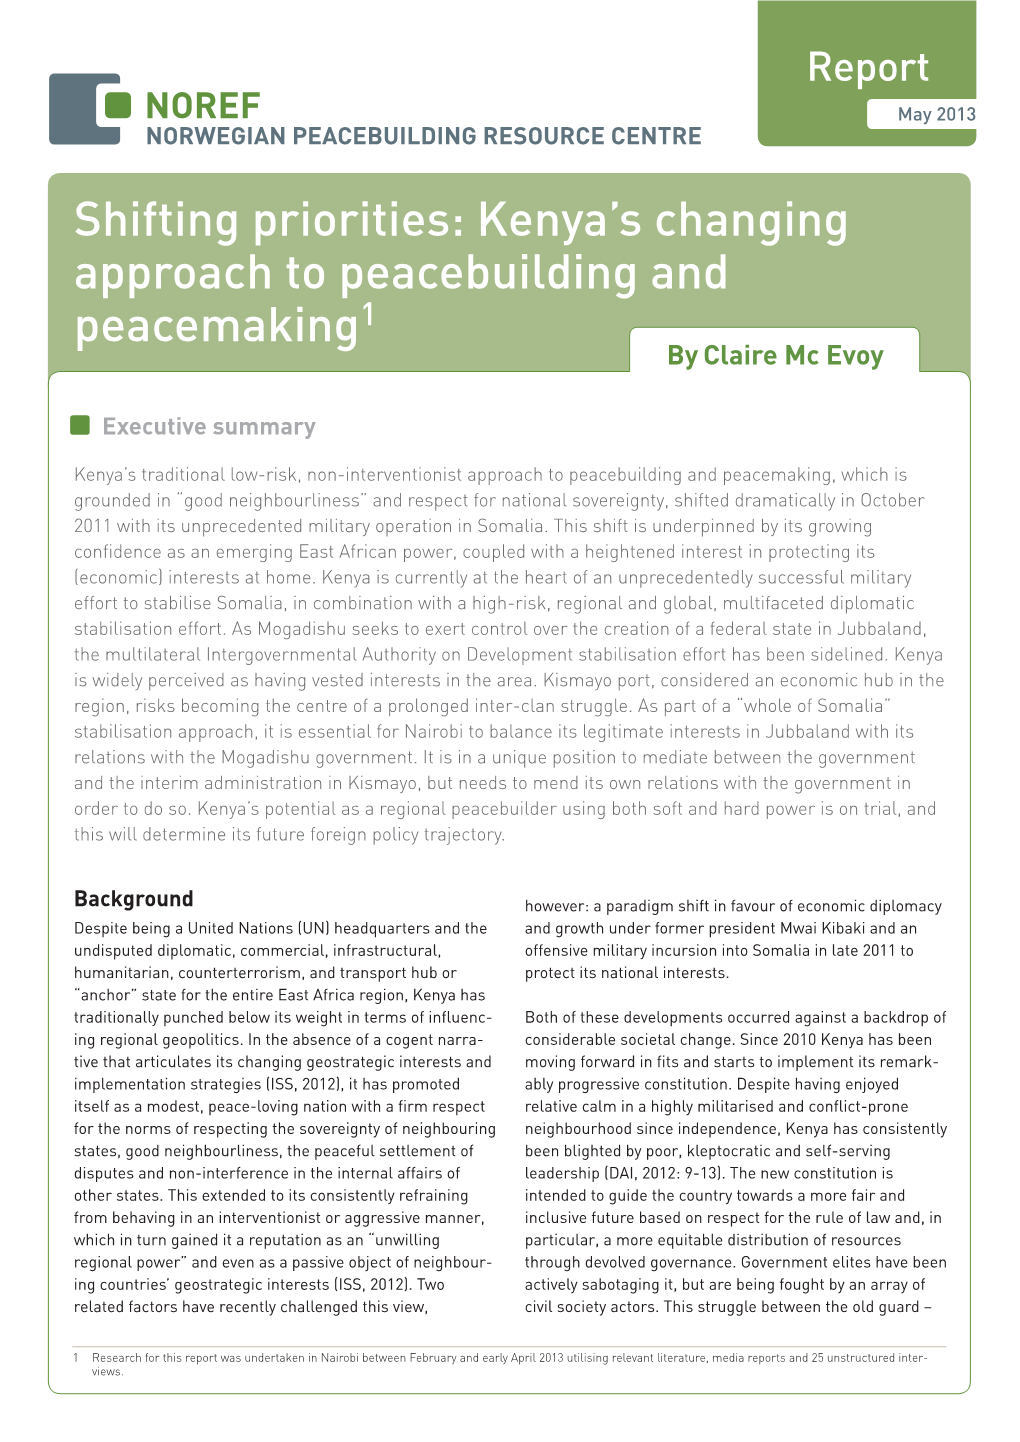 Shifting Priorities: Kenya's Changing Approach to Peacebuilding And